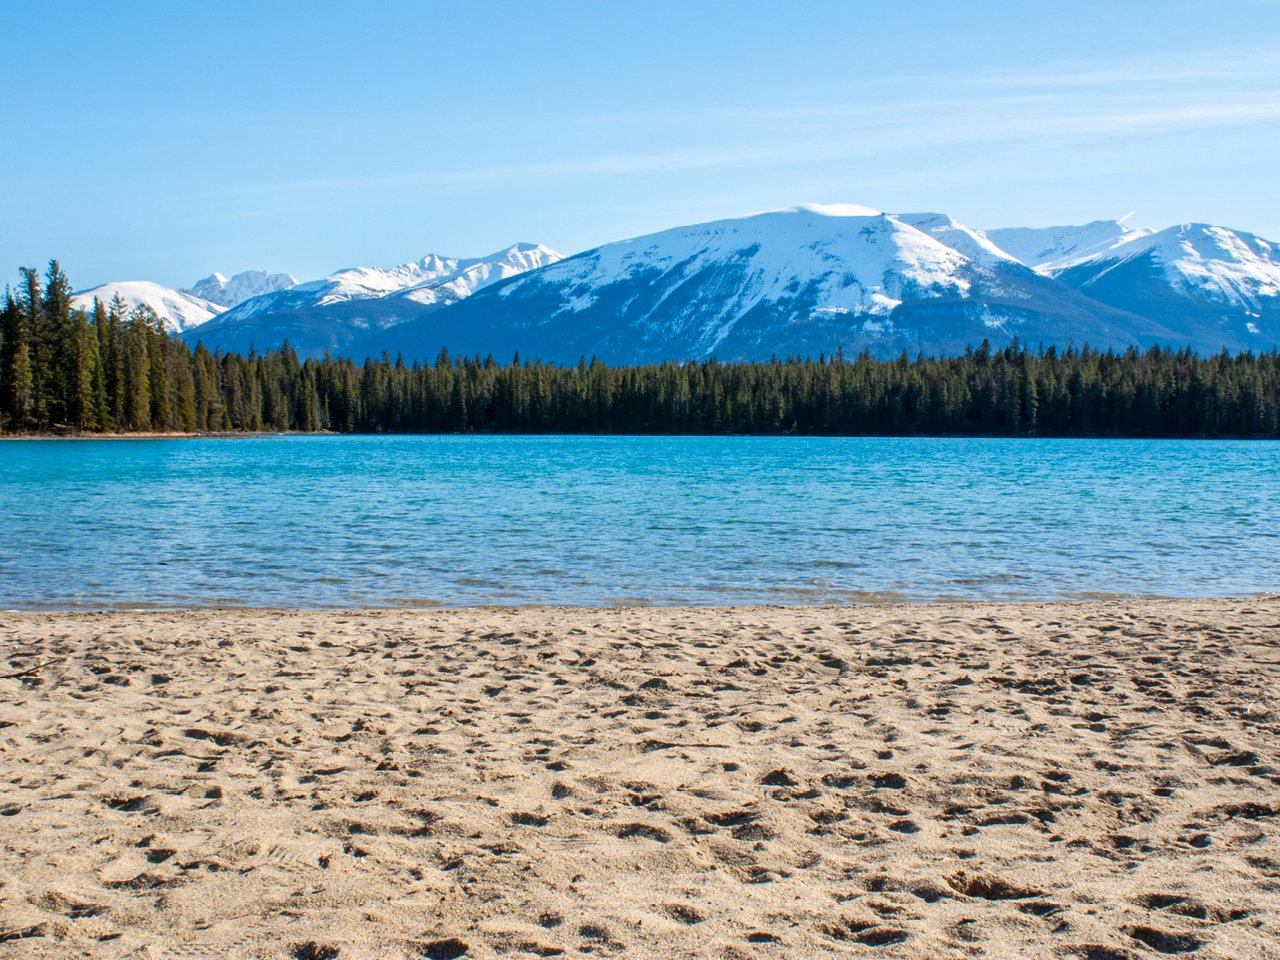 Beach and lakeside, in the distance: forestry and snowy mountain tops